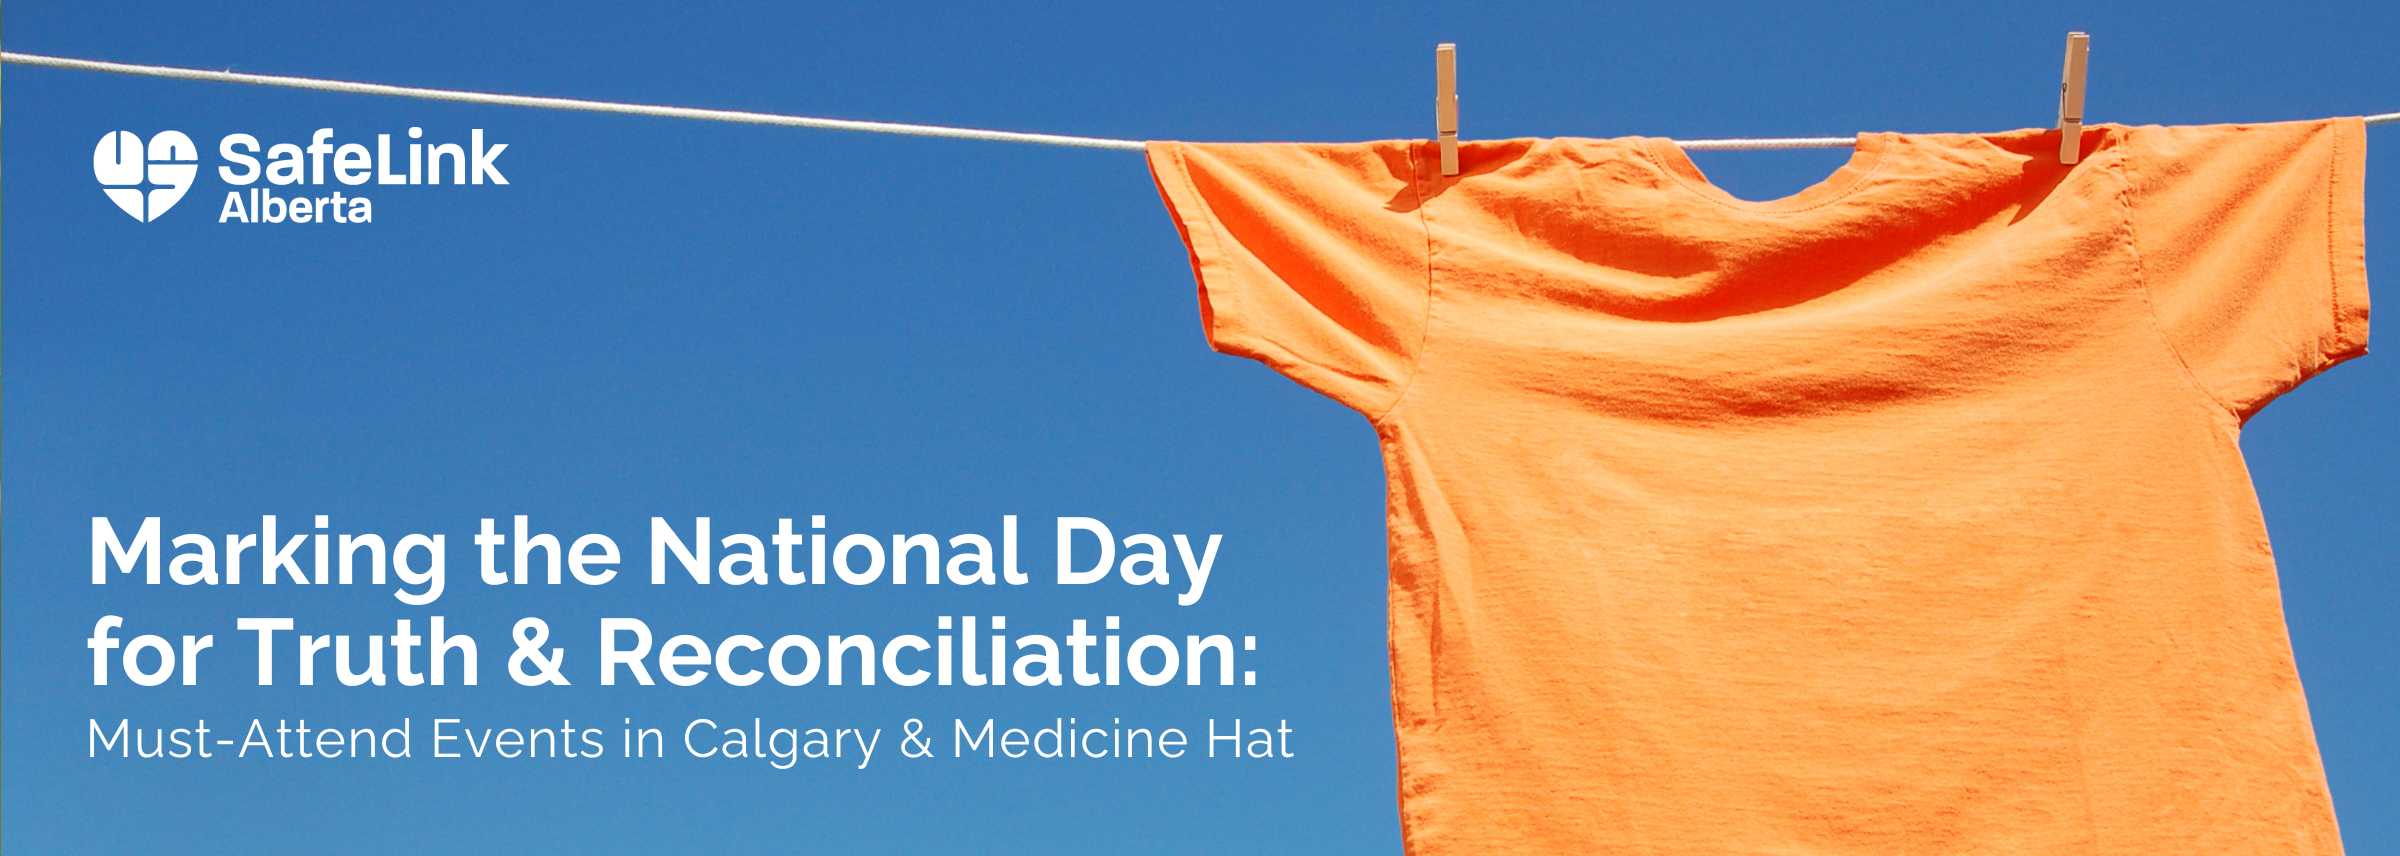 Bright orange shirt hanging on a clothes line against a bright blue sky. Text reads "Marking the National Day for Truth & Reconciliation: Must-attend events in Calgary & Medicine Hat"